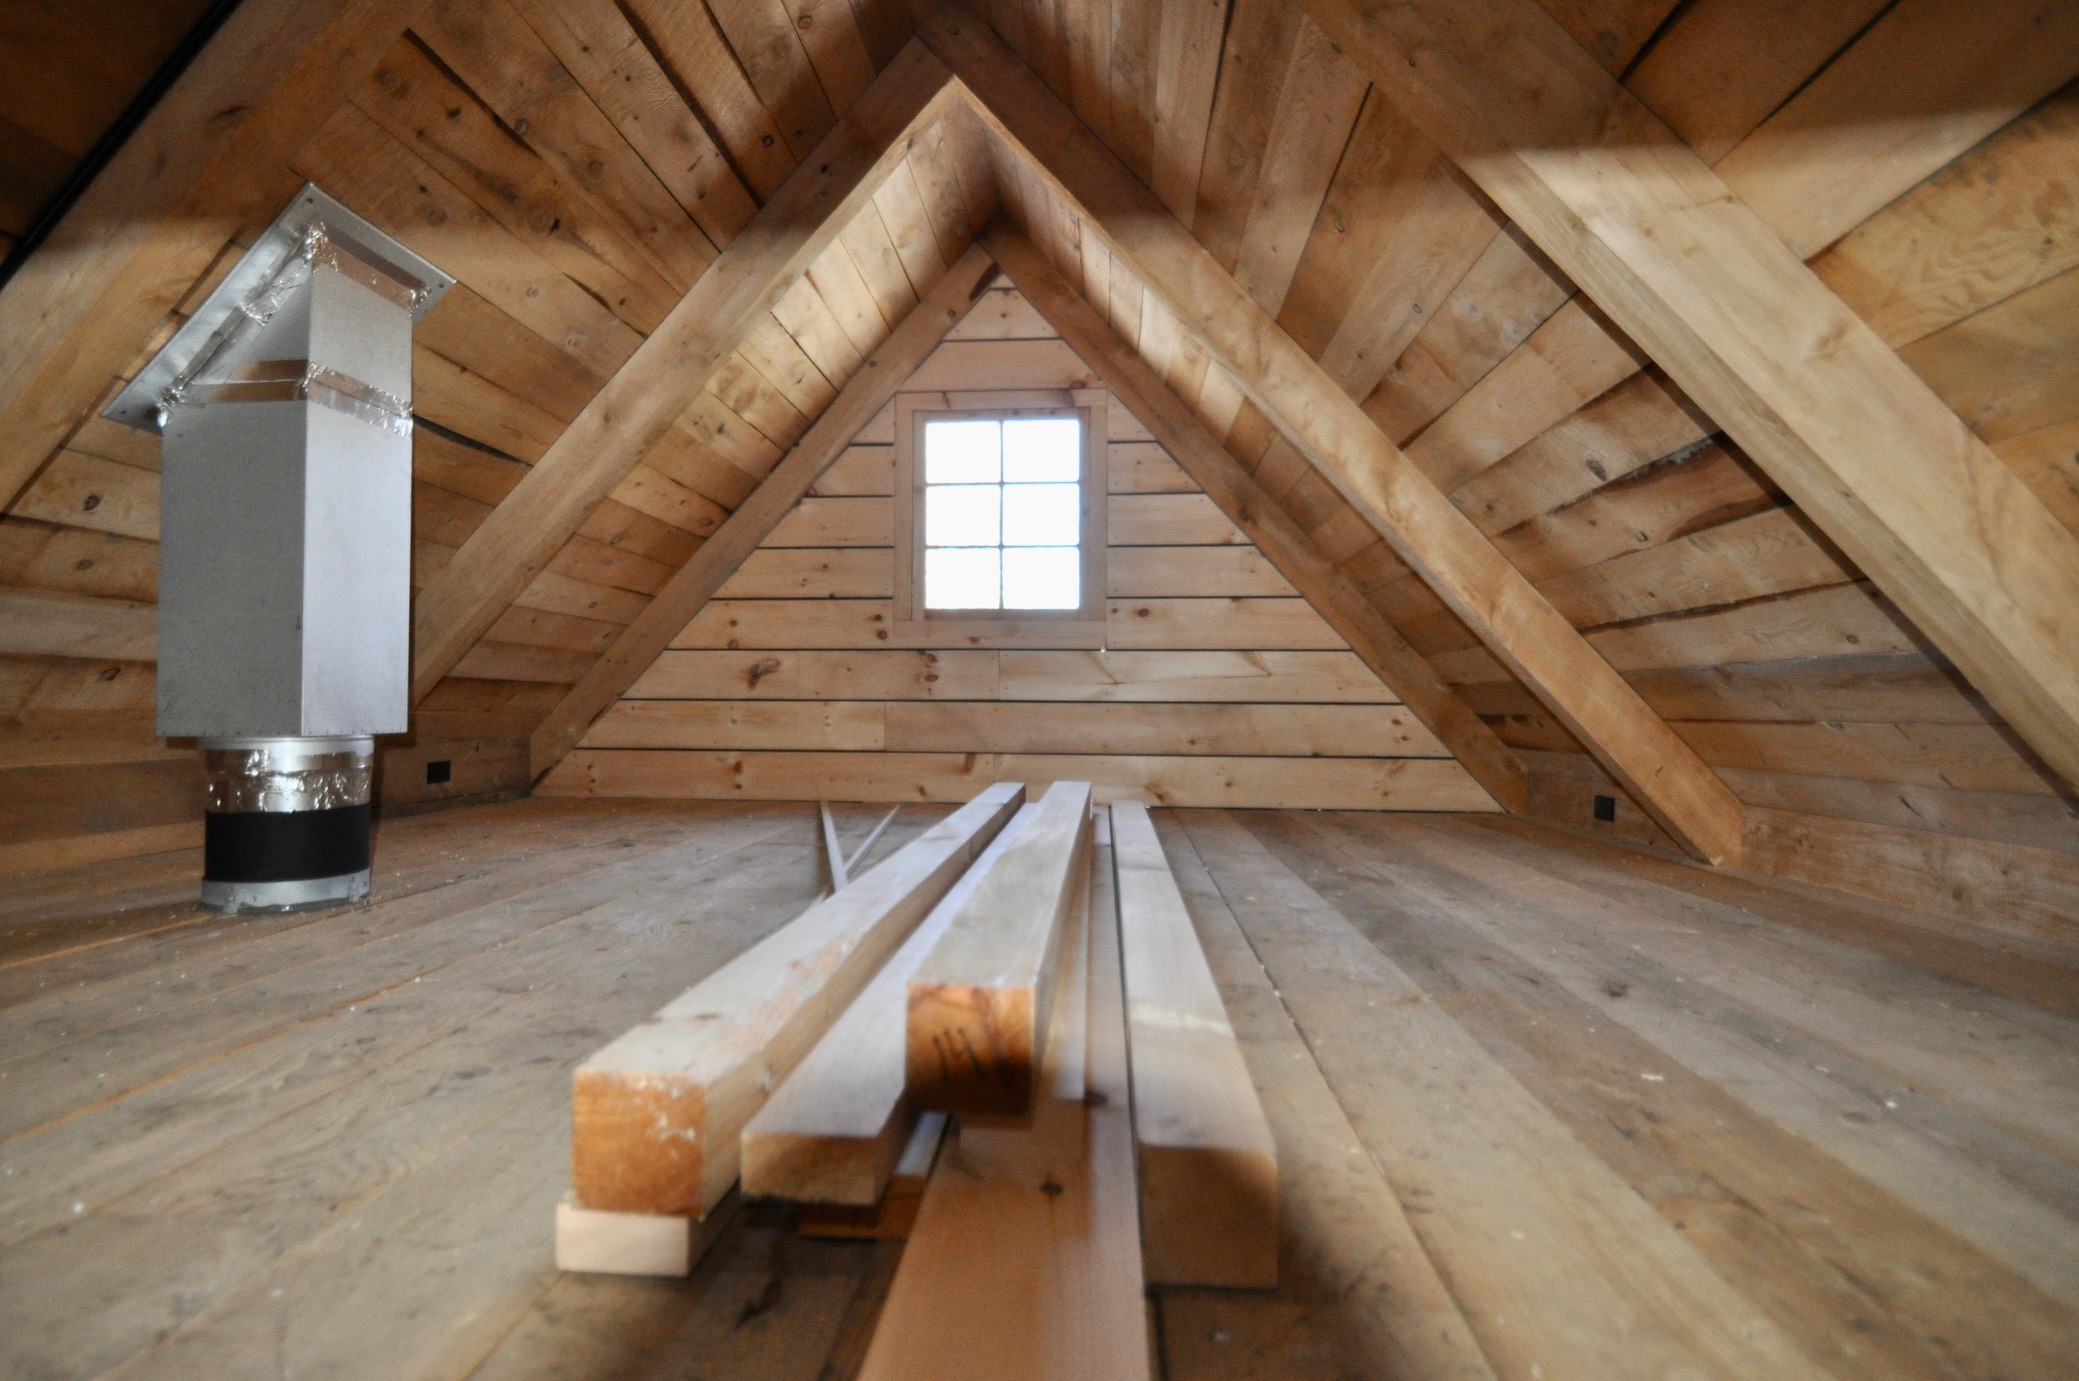 A loft space in a timber frame cabin, with a peaked ceiling and a big window.